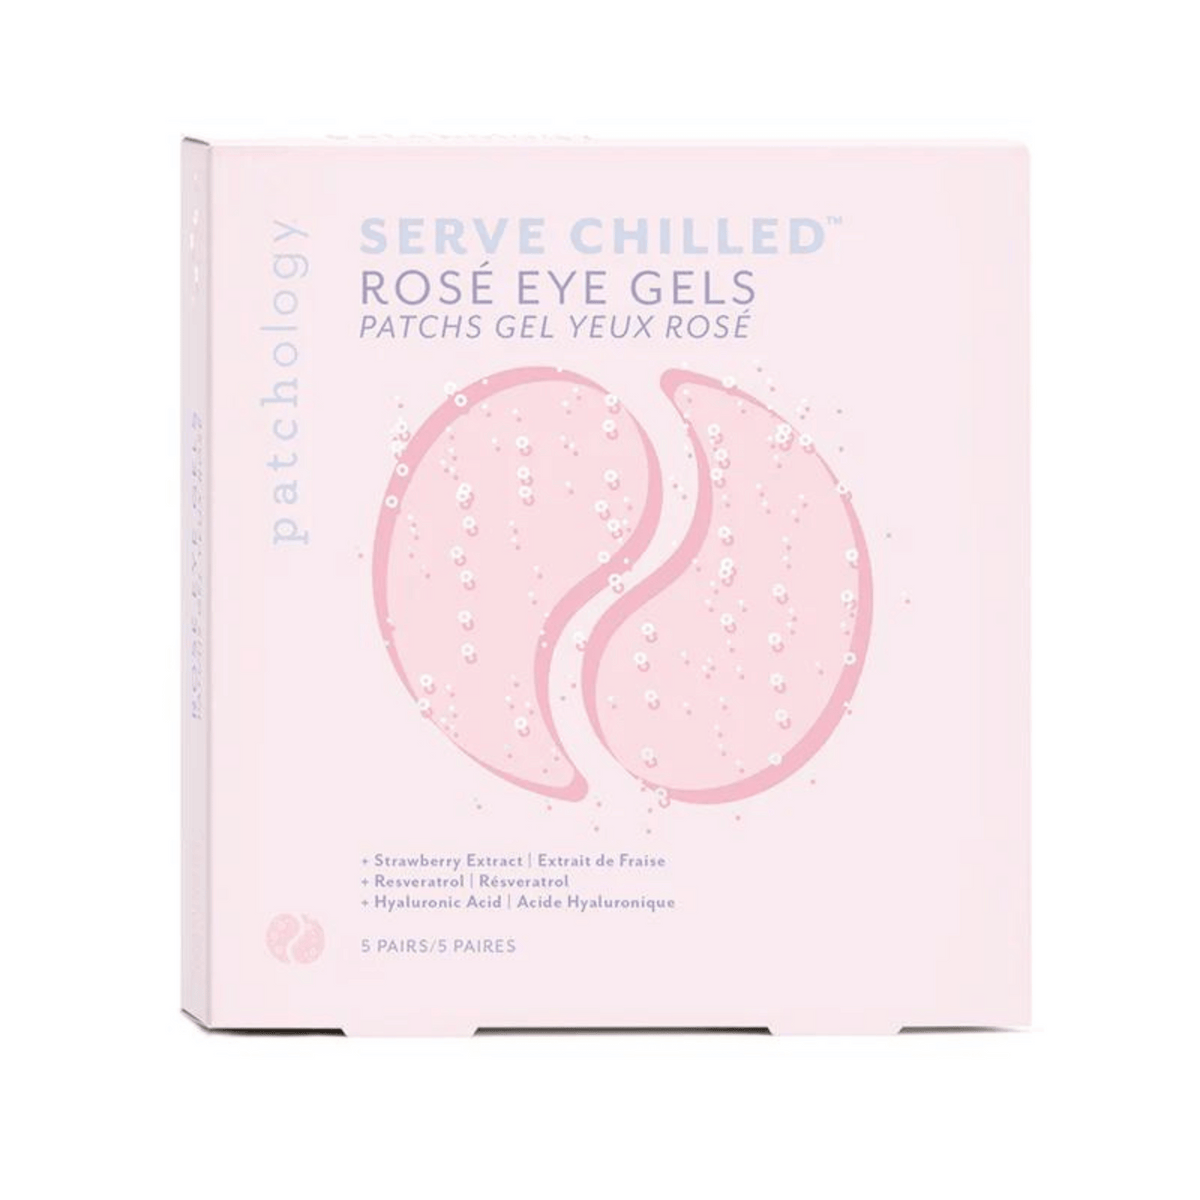 Primary Image of Served Chilled Rose Eye Gels